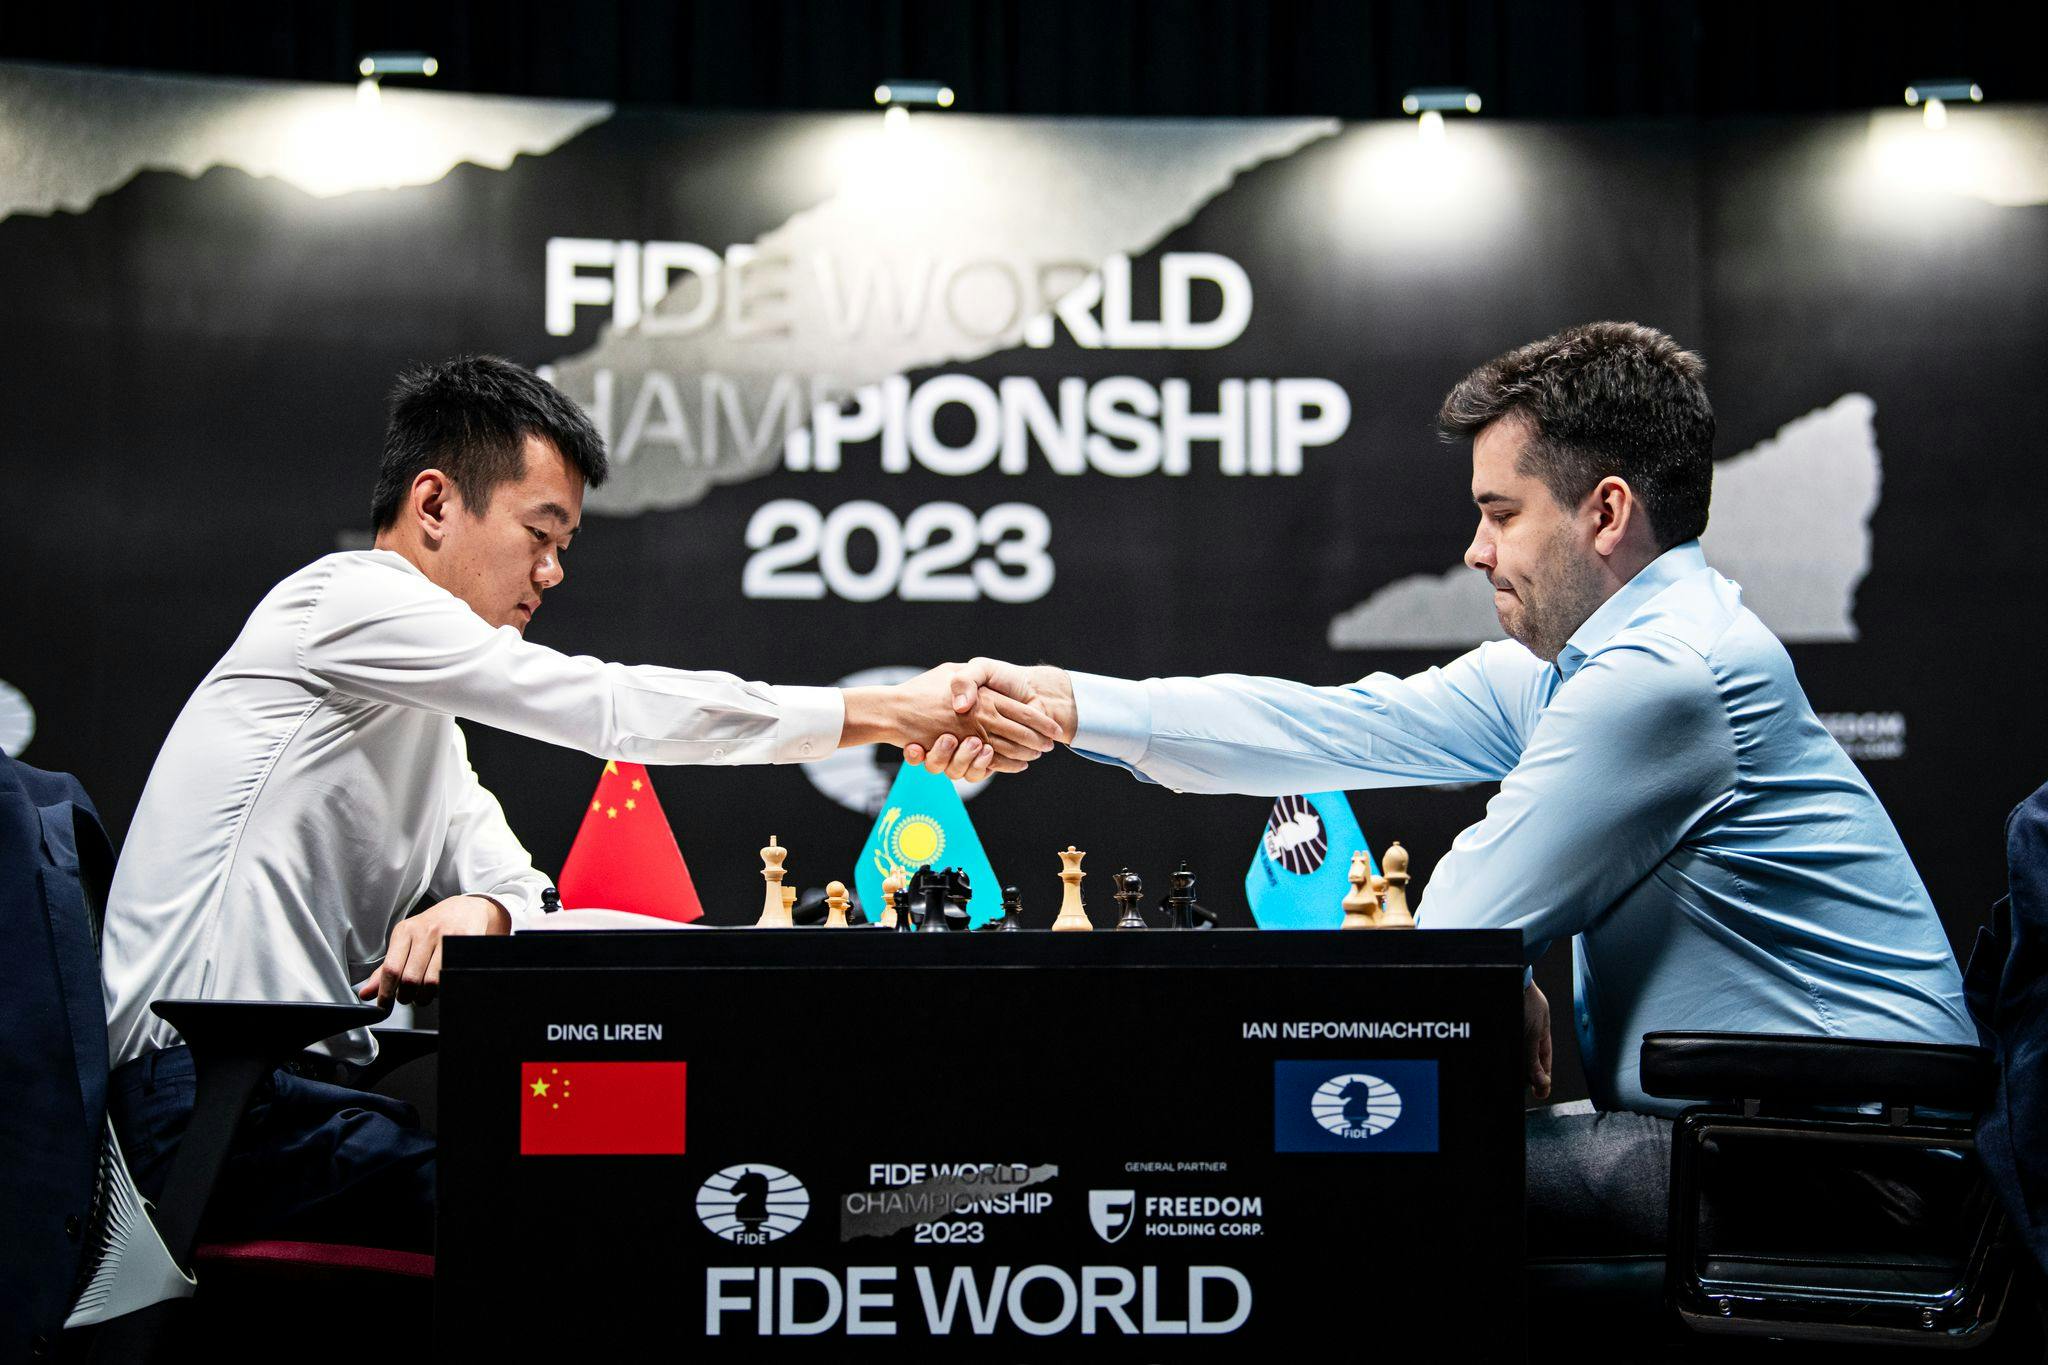 Chess World Championship: Nepomniachtchi versus Ding – Games 1 and 2